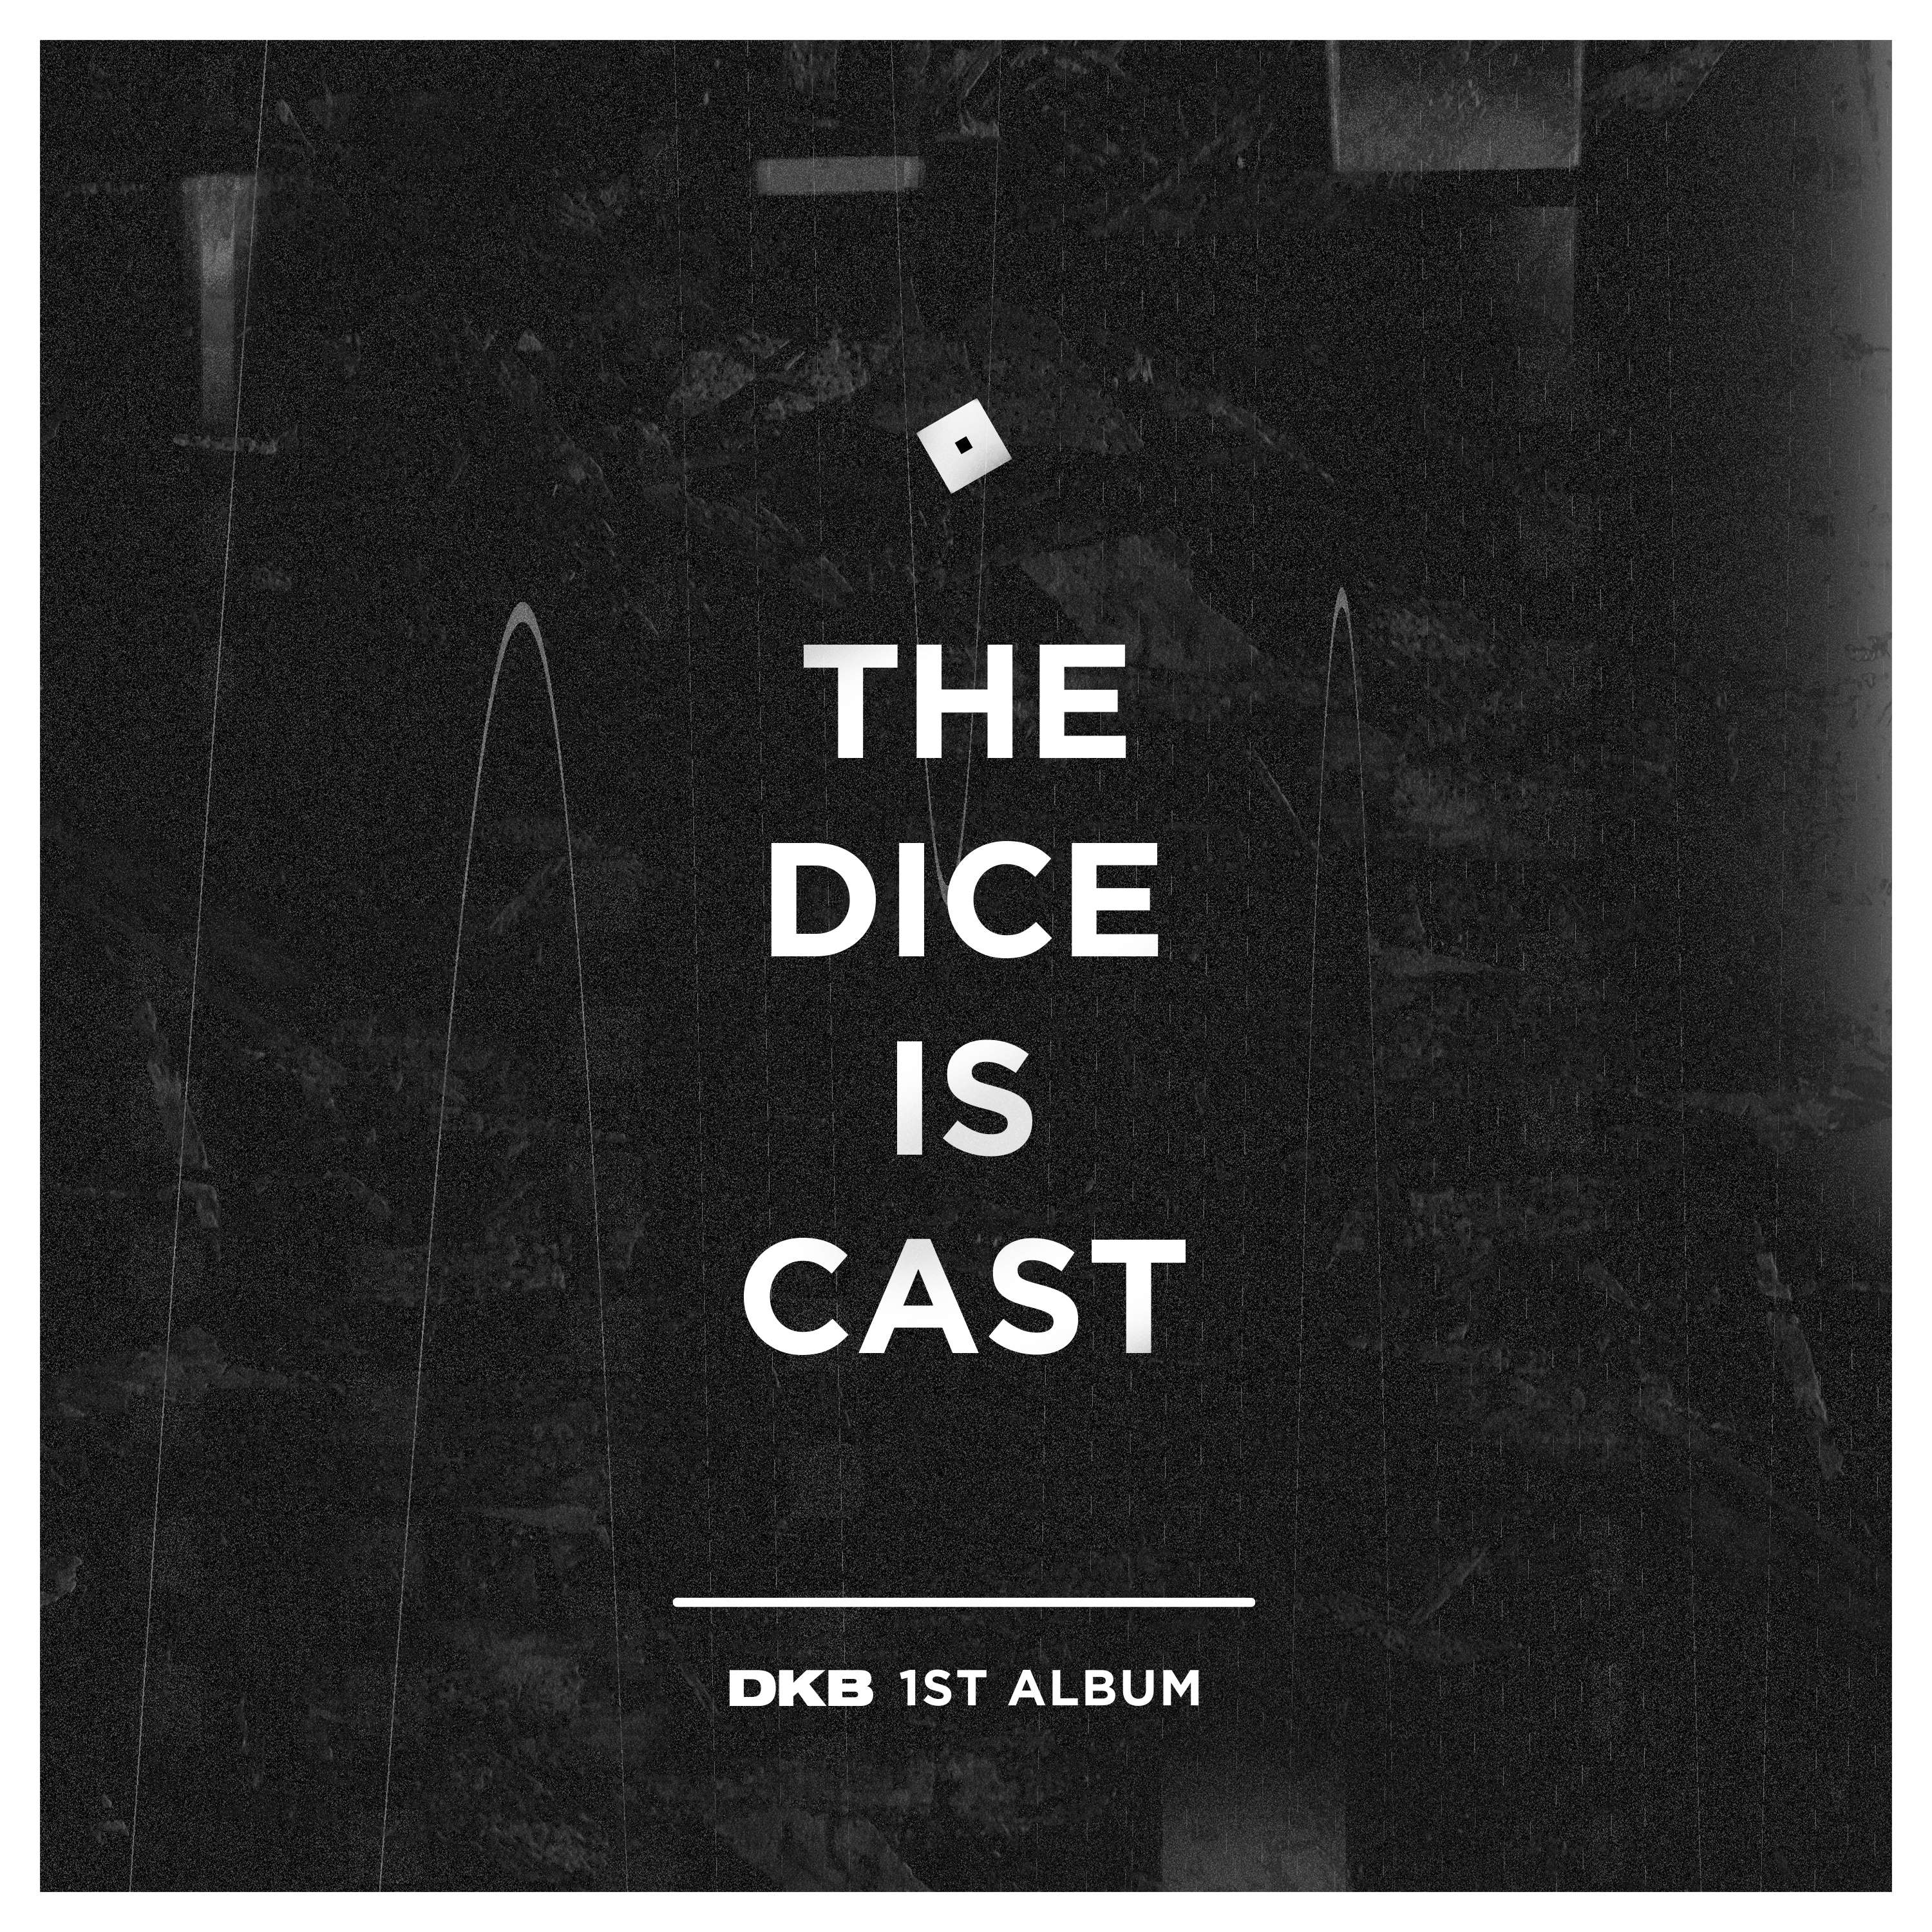 DKB The dice is cast Cover.jpg